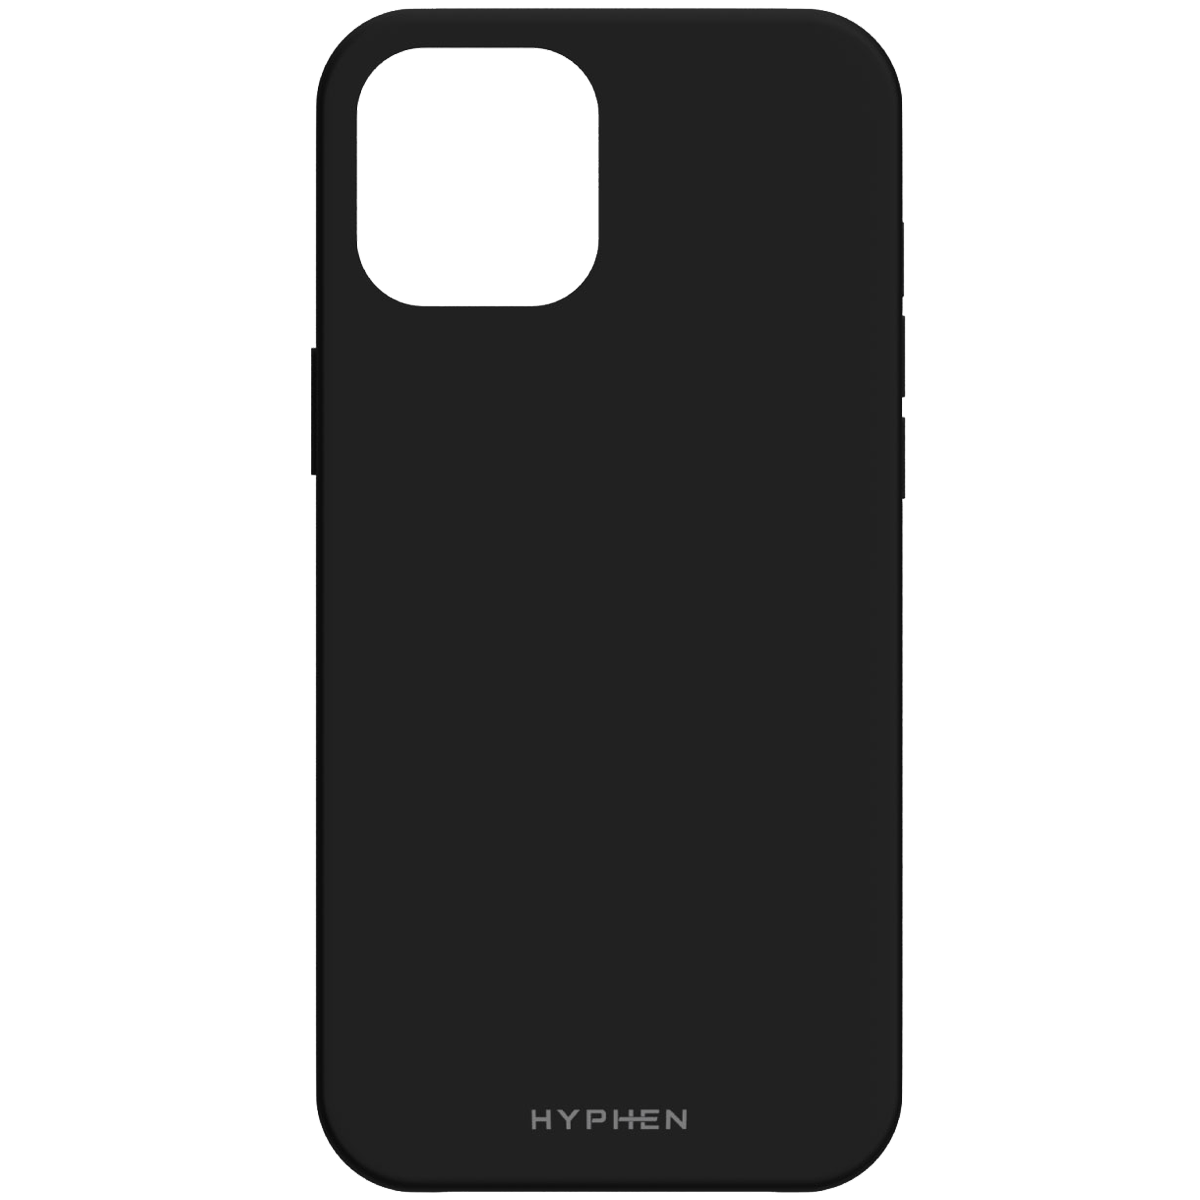 hyphen - hyphen Tint Silicone Back Case For iPhone 12 Pro Max (Compact and Flexible, hpC-SXII670060, Black)